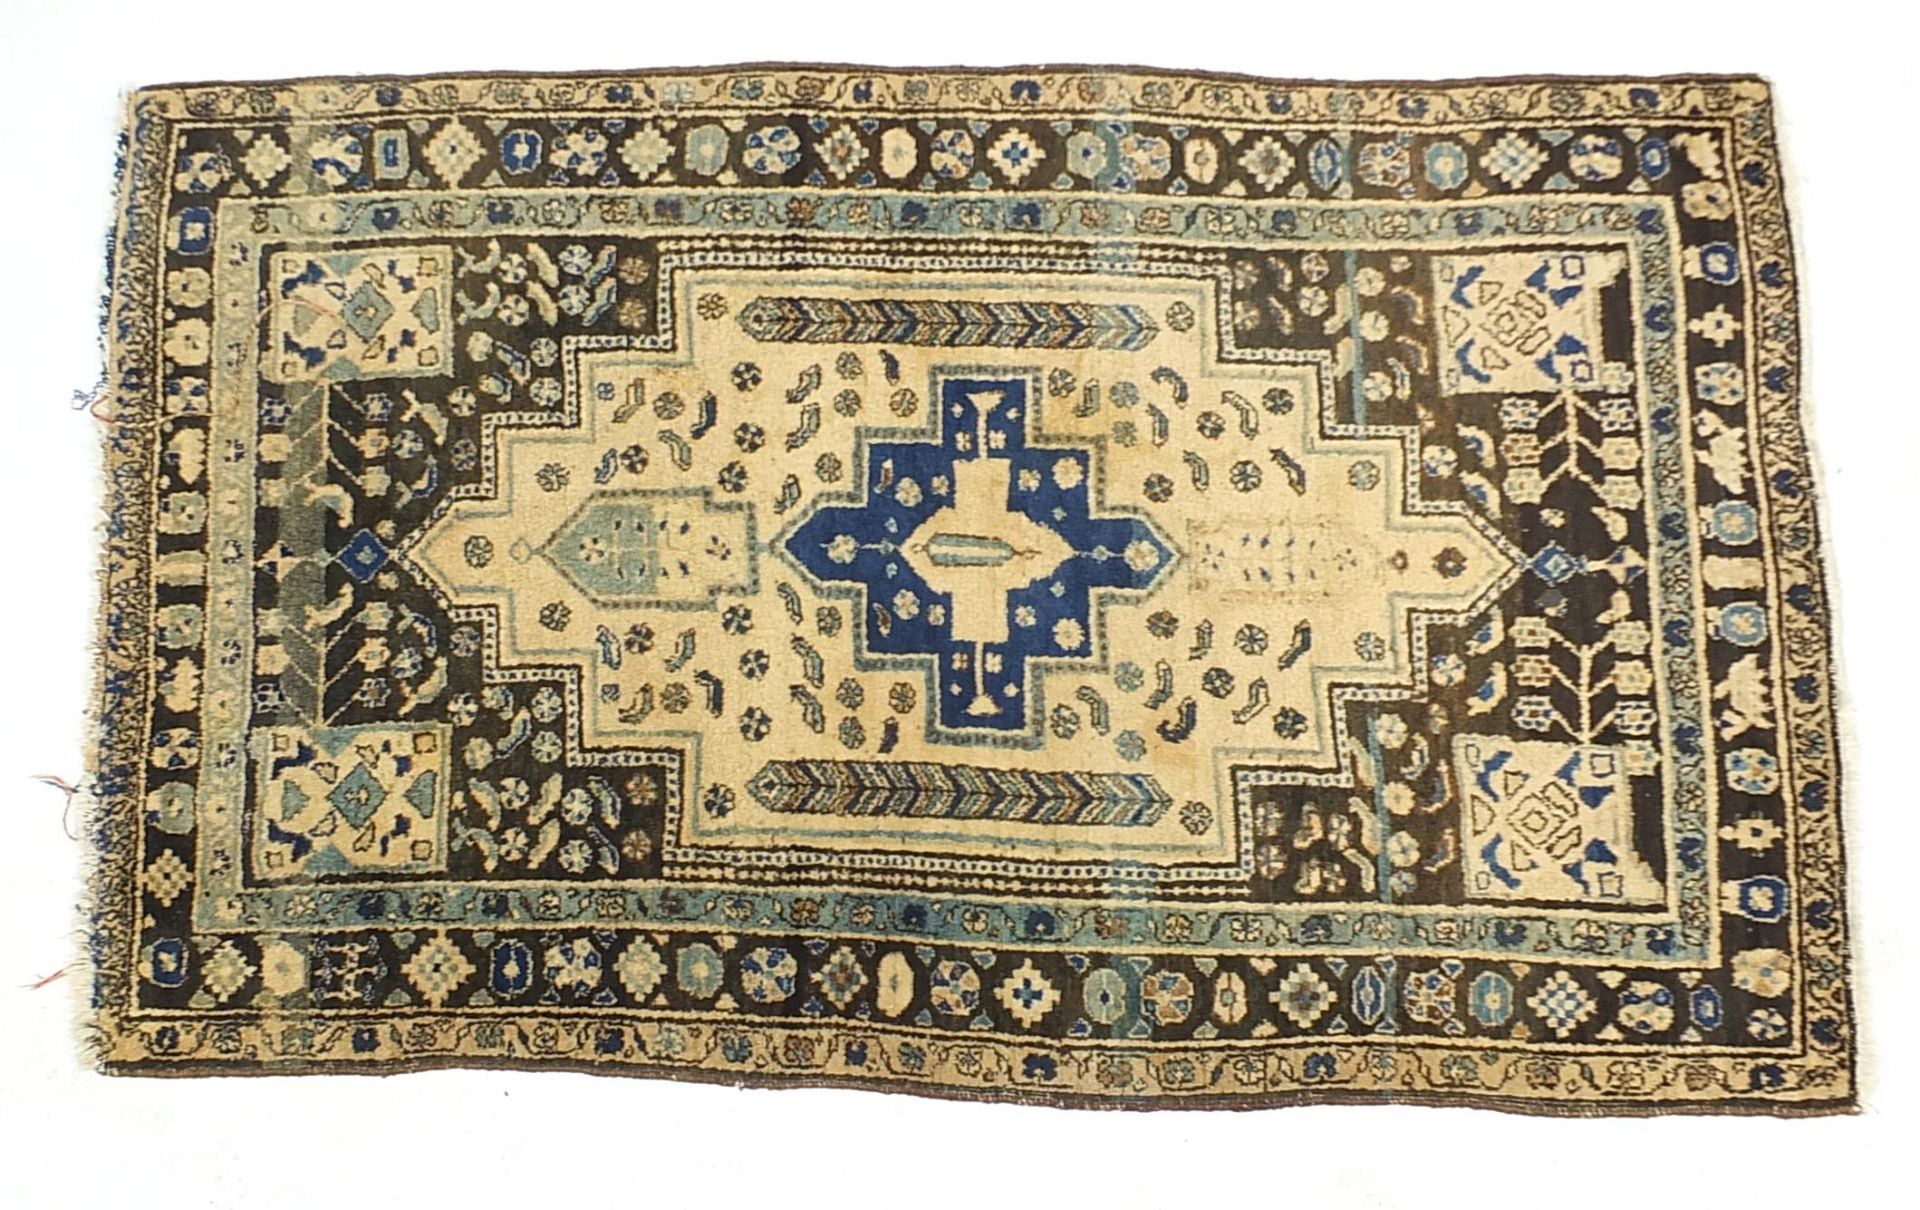 Brown, blue and beige ground rug with all over geometric design, 205cm x 128cm